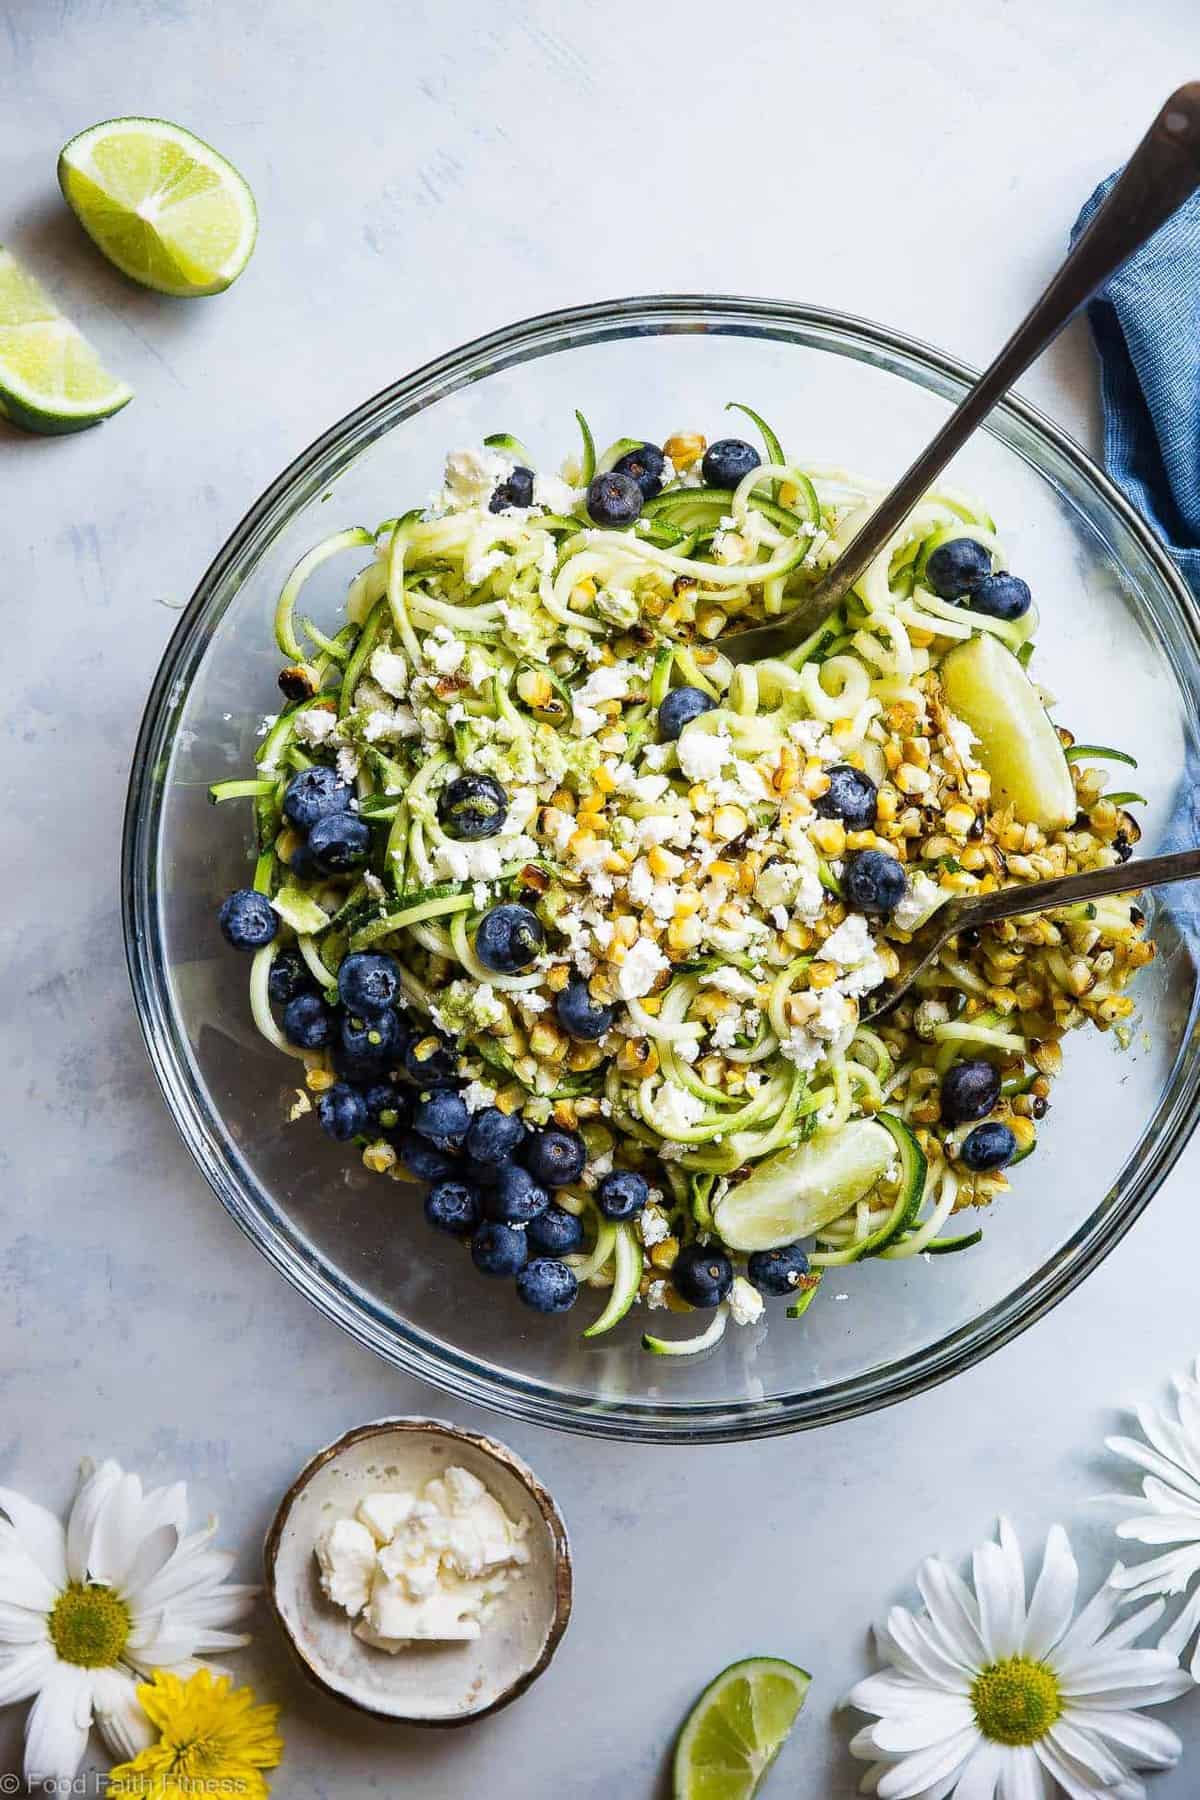 Summer Zucchini Noodle Pasta Salad - This gluten free Zucchini Noodle Pasta Salad is an easy, healthy side dish loaded with smoky grilled corn, sweet blueberries and  a tangy honey lime basil vinaigrette! Perfect for summer potlucks and only 140 calories! | #Foodfaithfitness | #Healthy #Spiralized #Glutenfree #Vegetarian #Salad